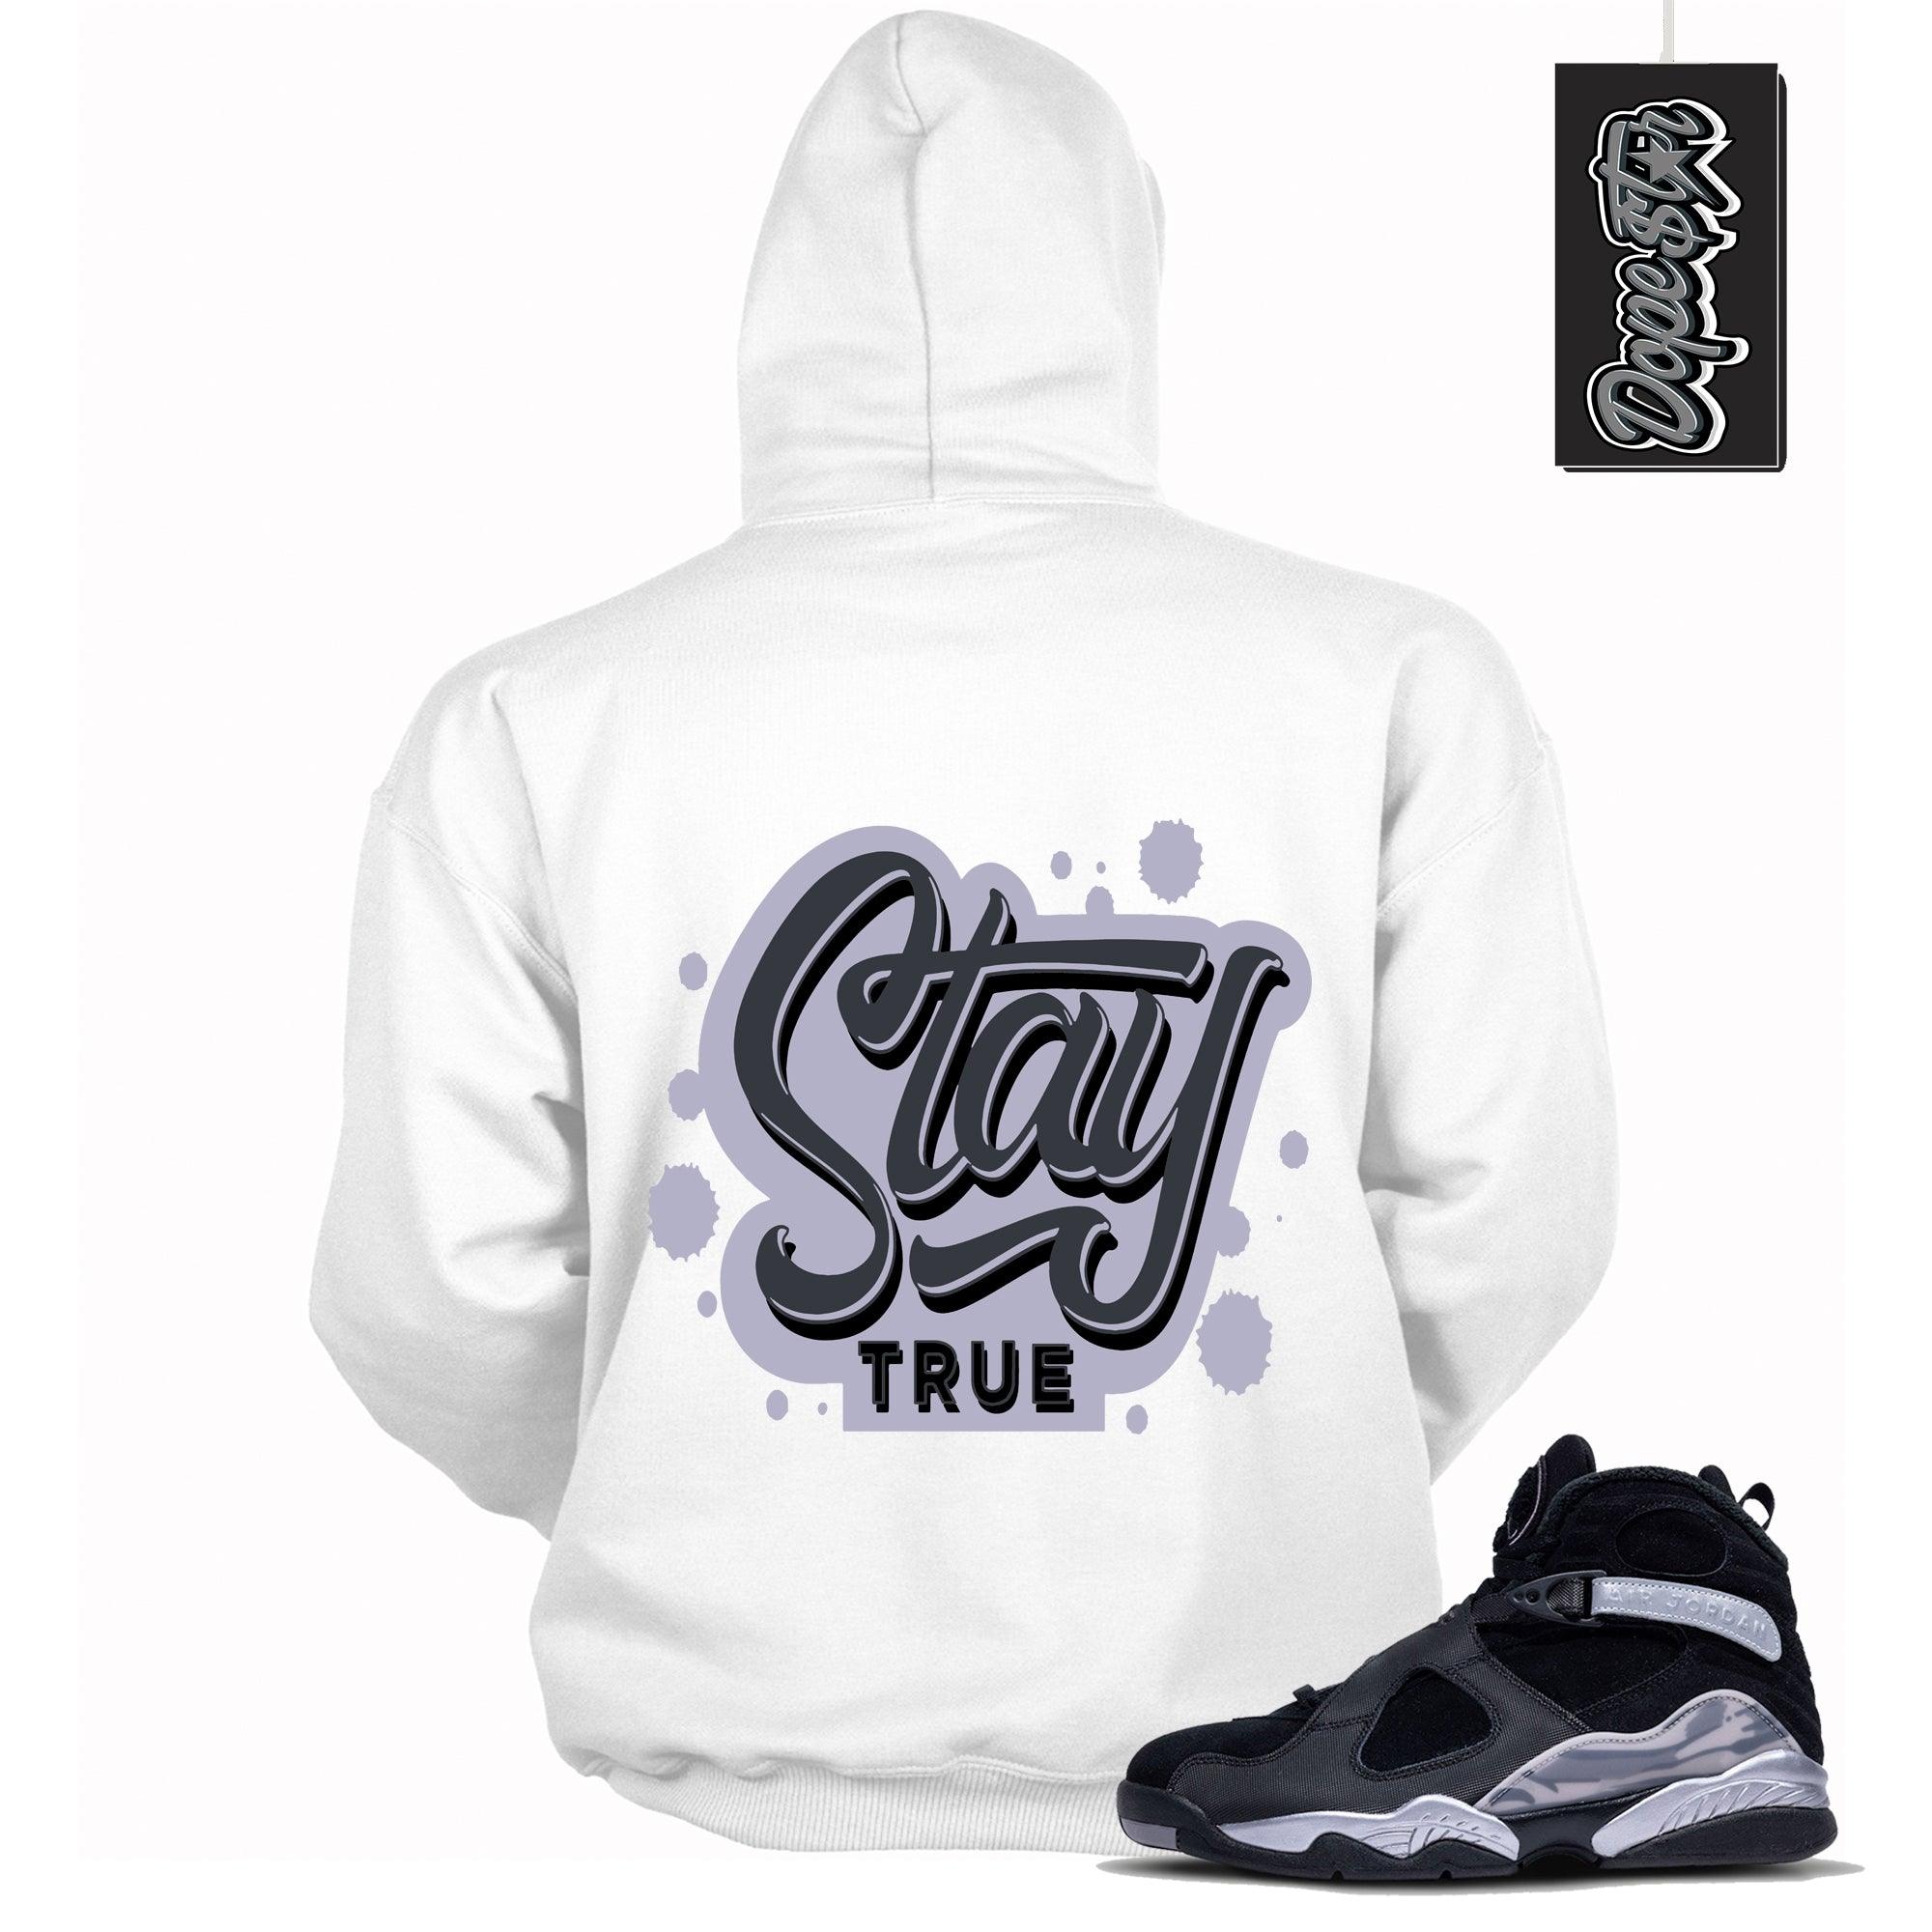 Cool White Graphic Hoodie with “ Stay True “ print, that perfectly matches Air Jordan 8 Winterized  sneakers